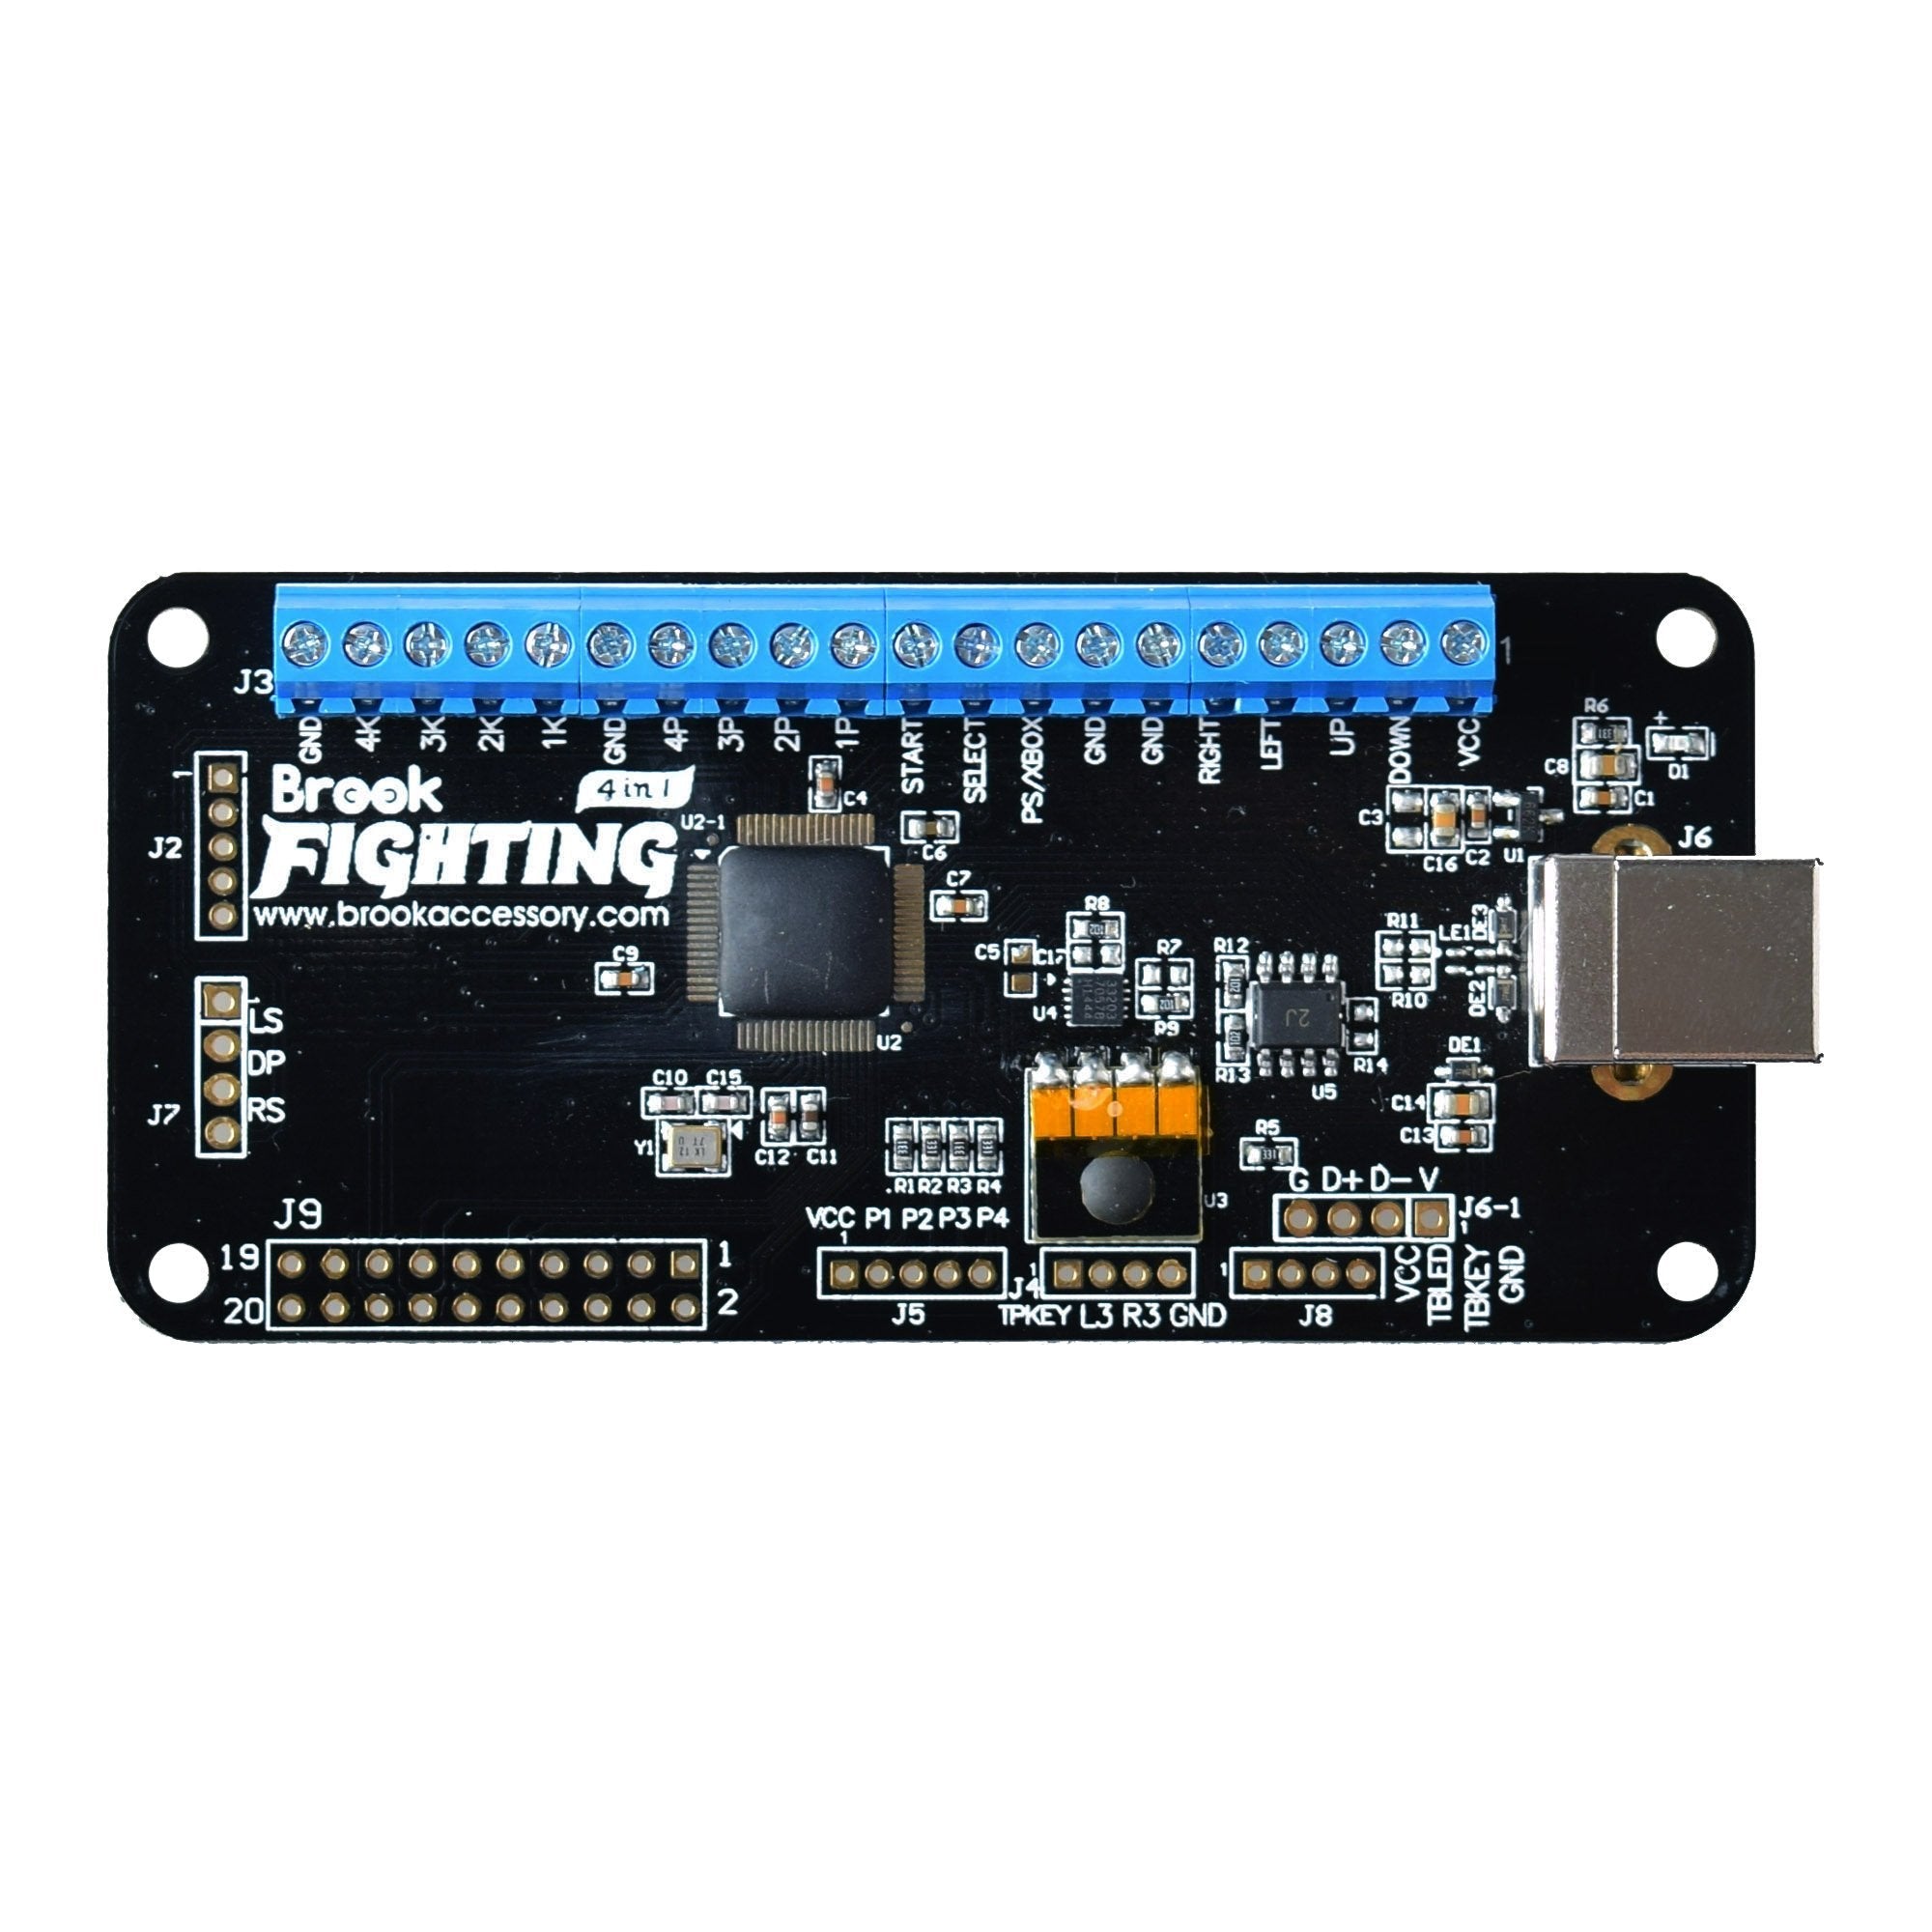 Gaming-Brook Universal Fighting Board (UFB) for Xbox One/Xbox 360/PS4/PS3/Wiii U/PC (MM00004657)